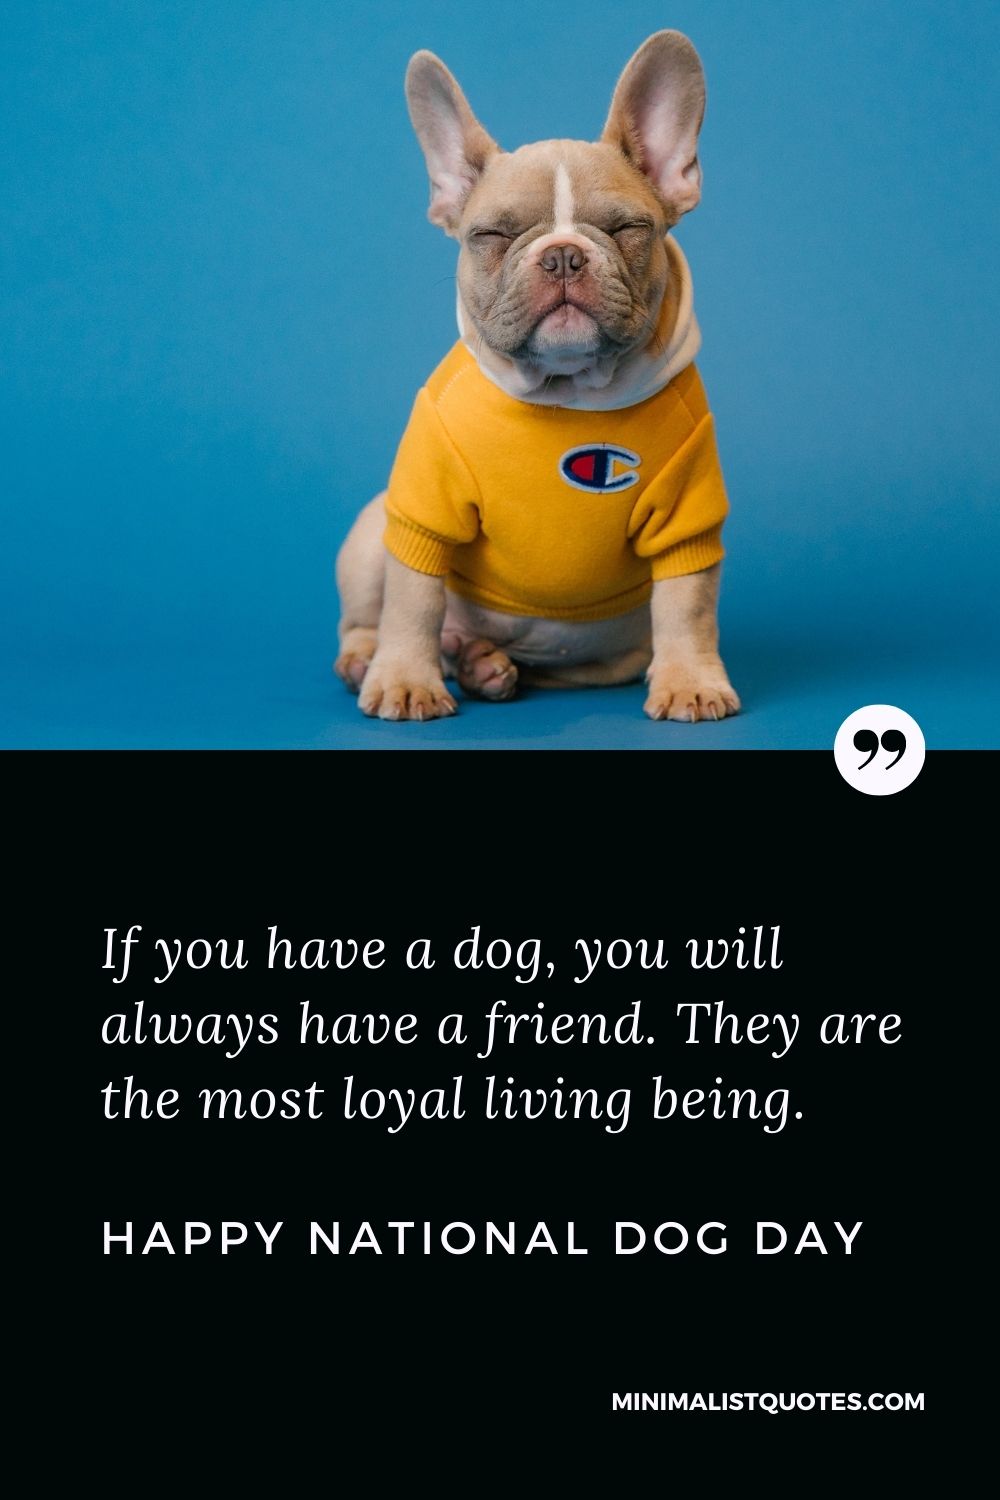 International Dog Day Quotes, Wishes & Messages